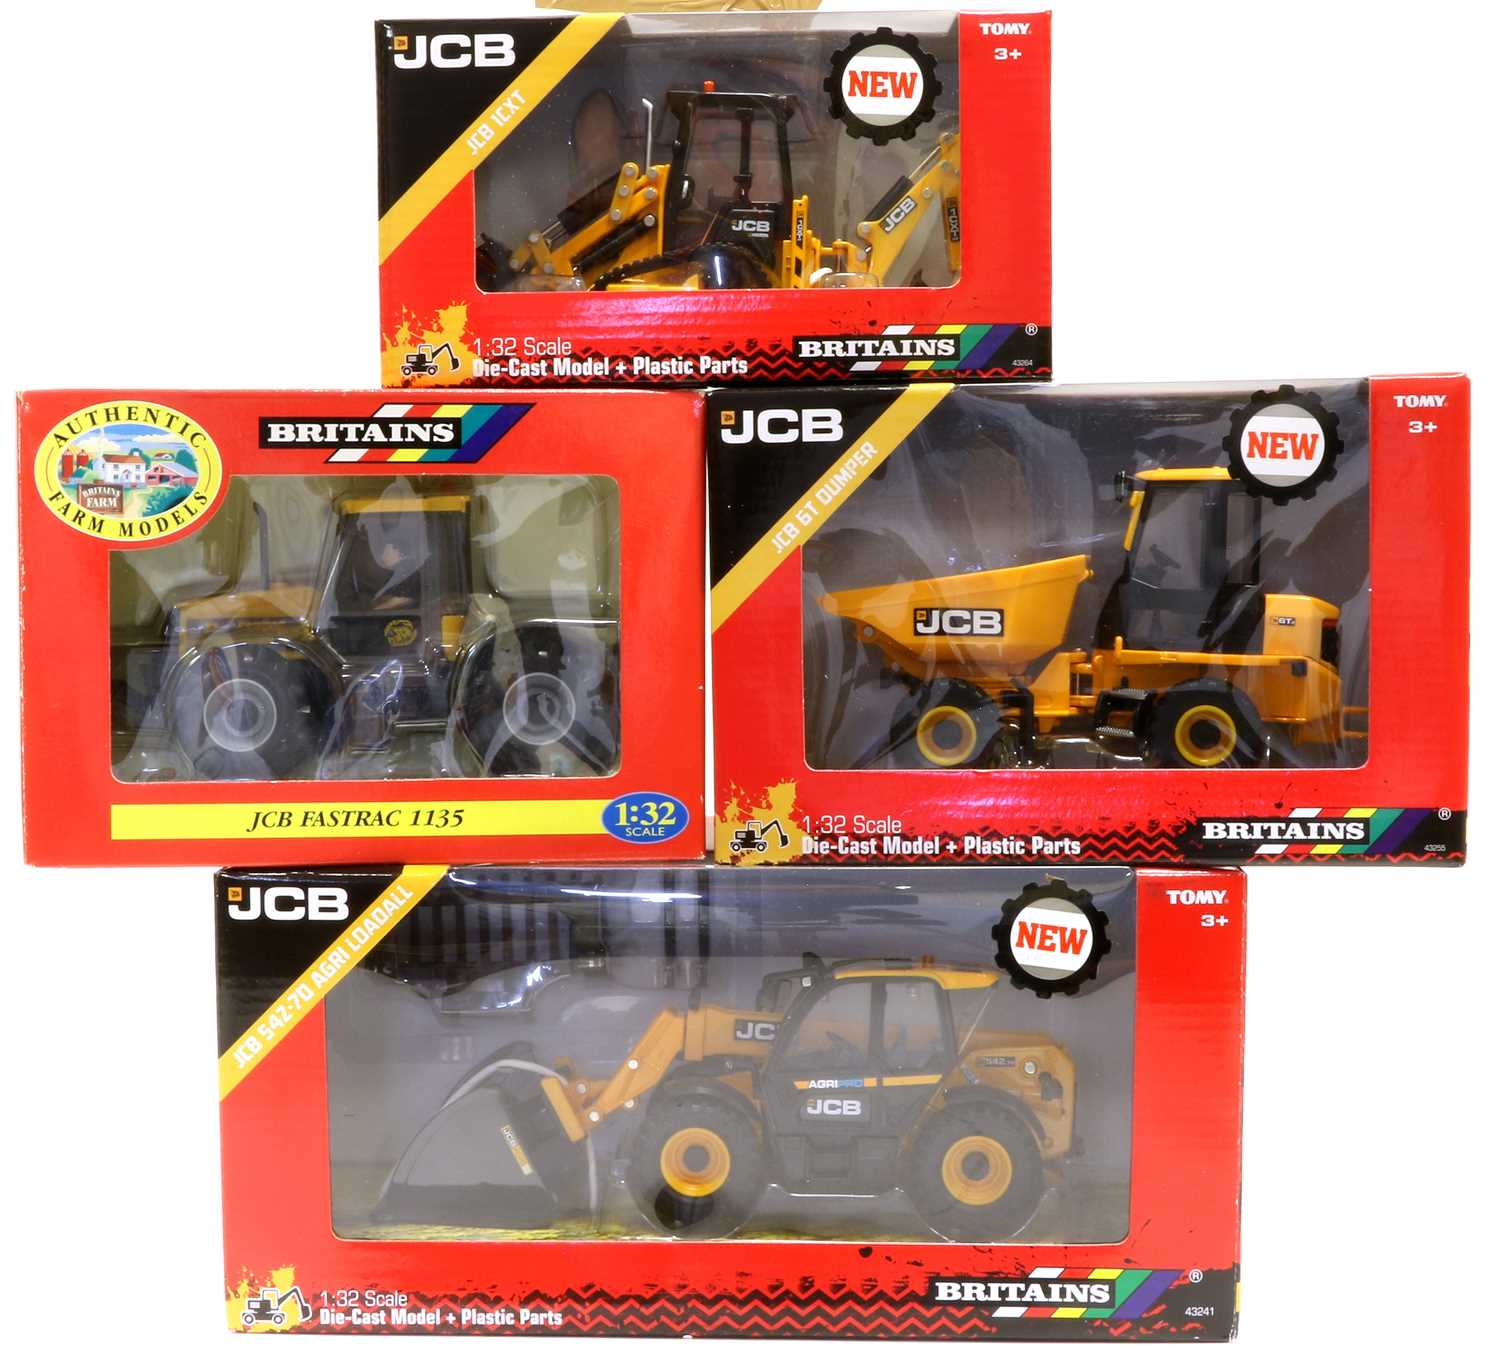 Britains JCB 1:32 Scale Models - Image 2 of 3